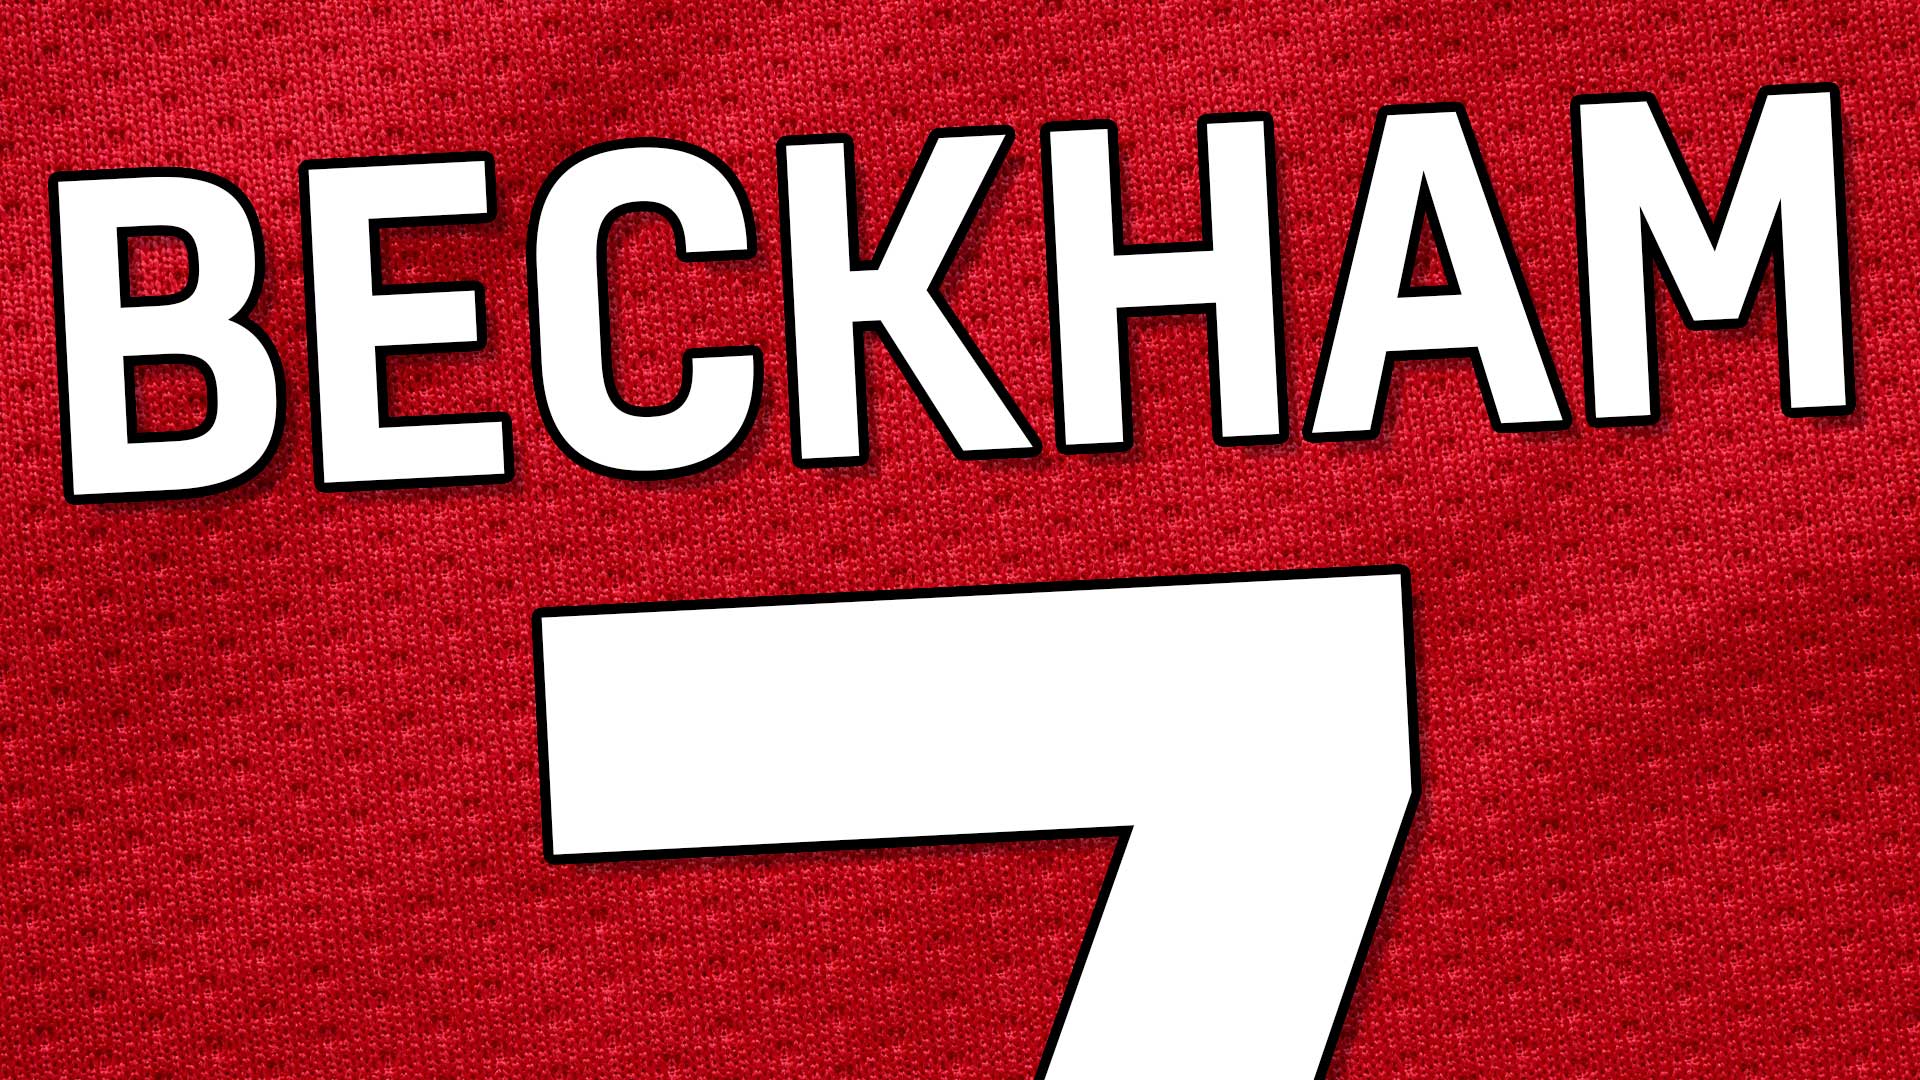 A red football shirt with the number 7 and Beckham printed on it